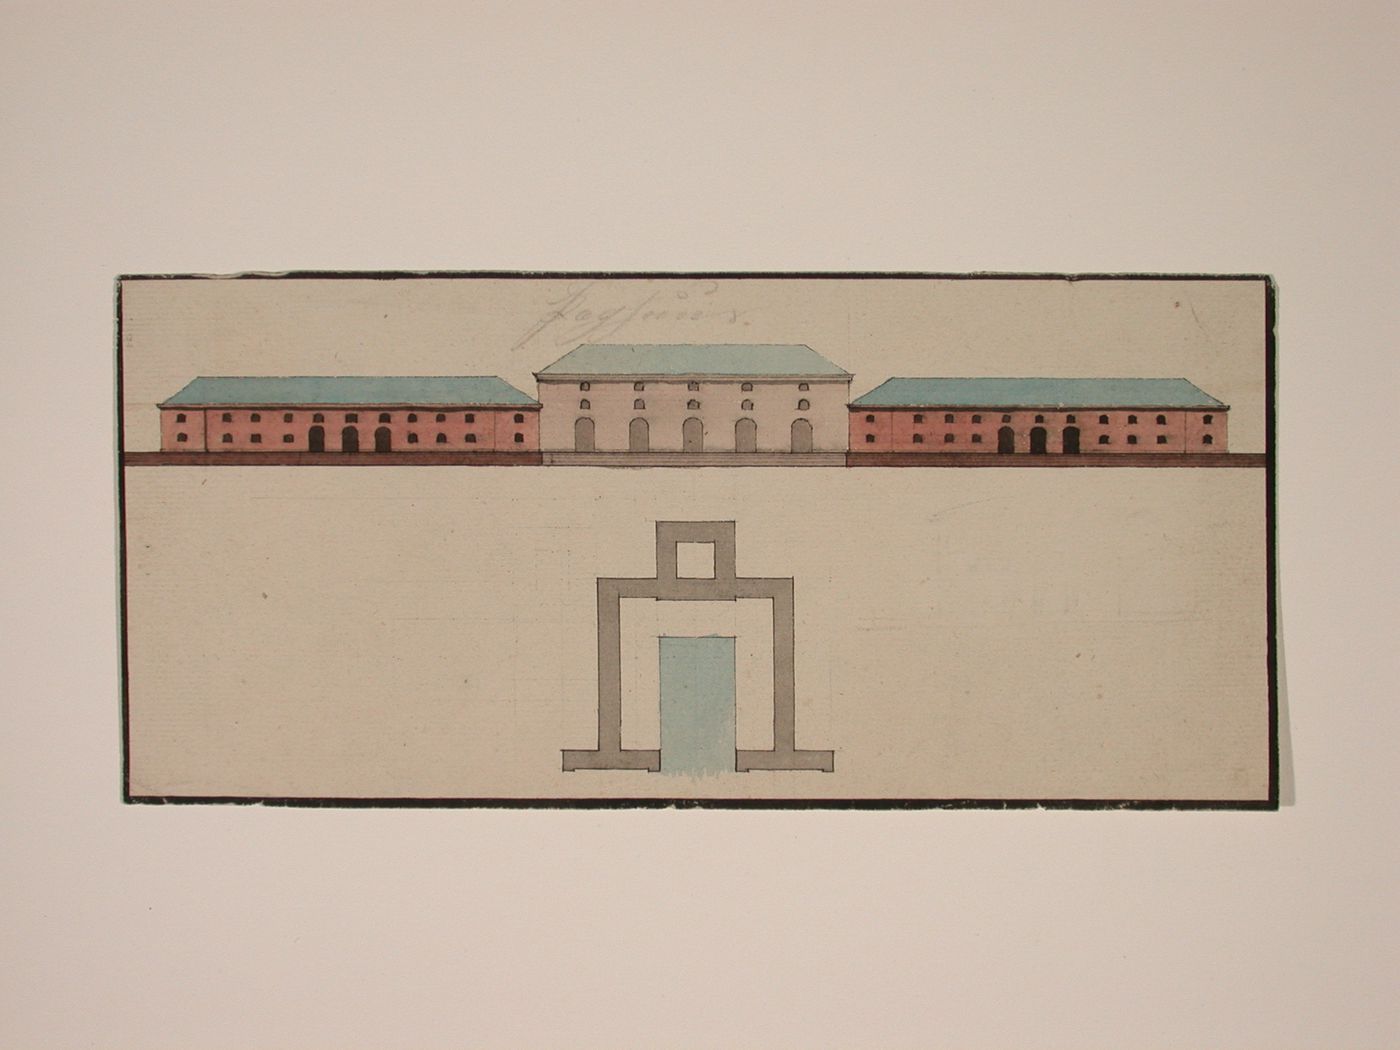 Plan and elevation of an officialbuilding possibly a customs house